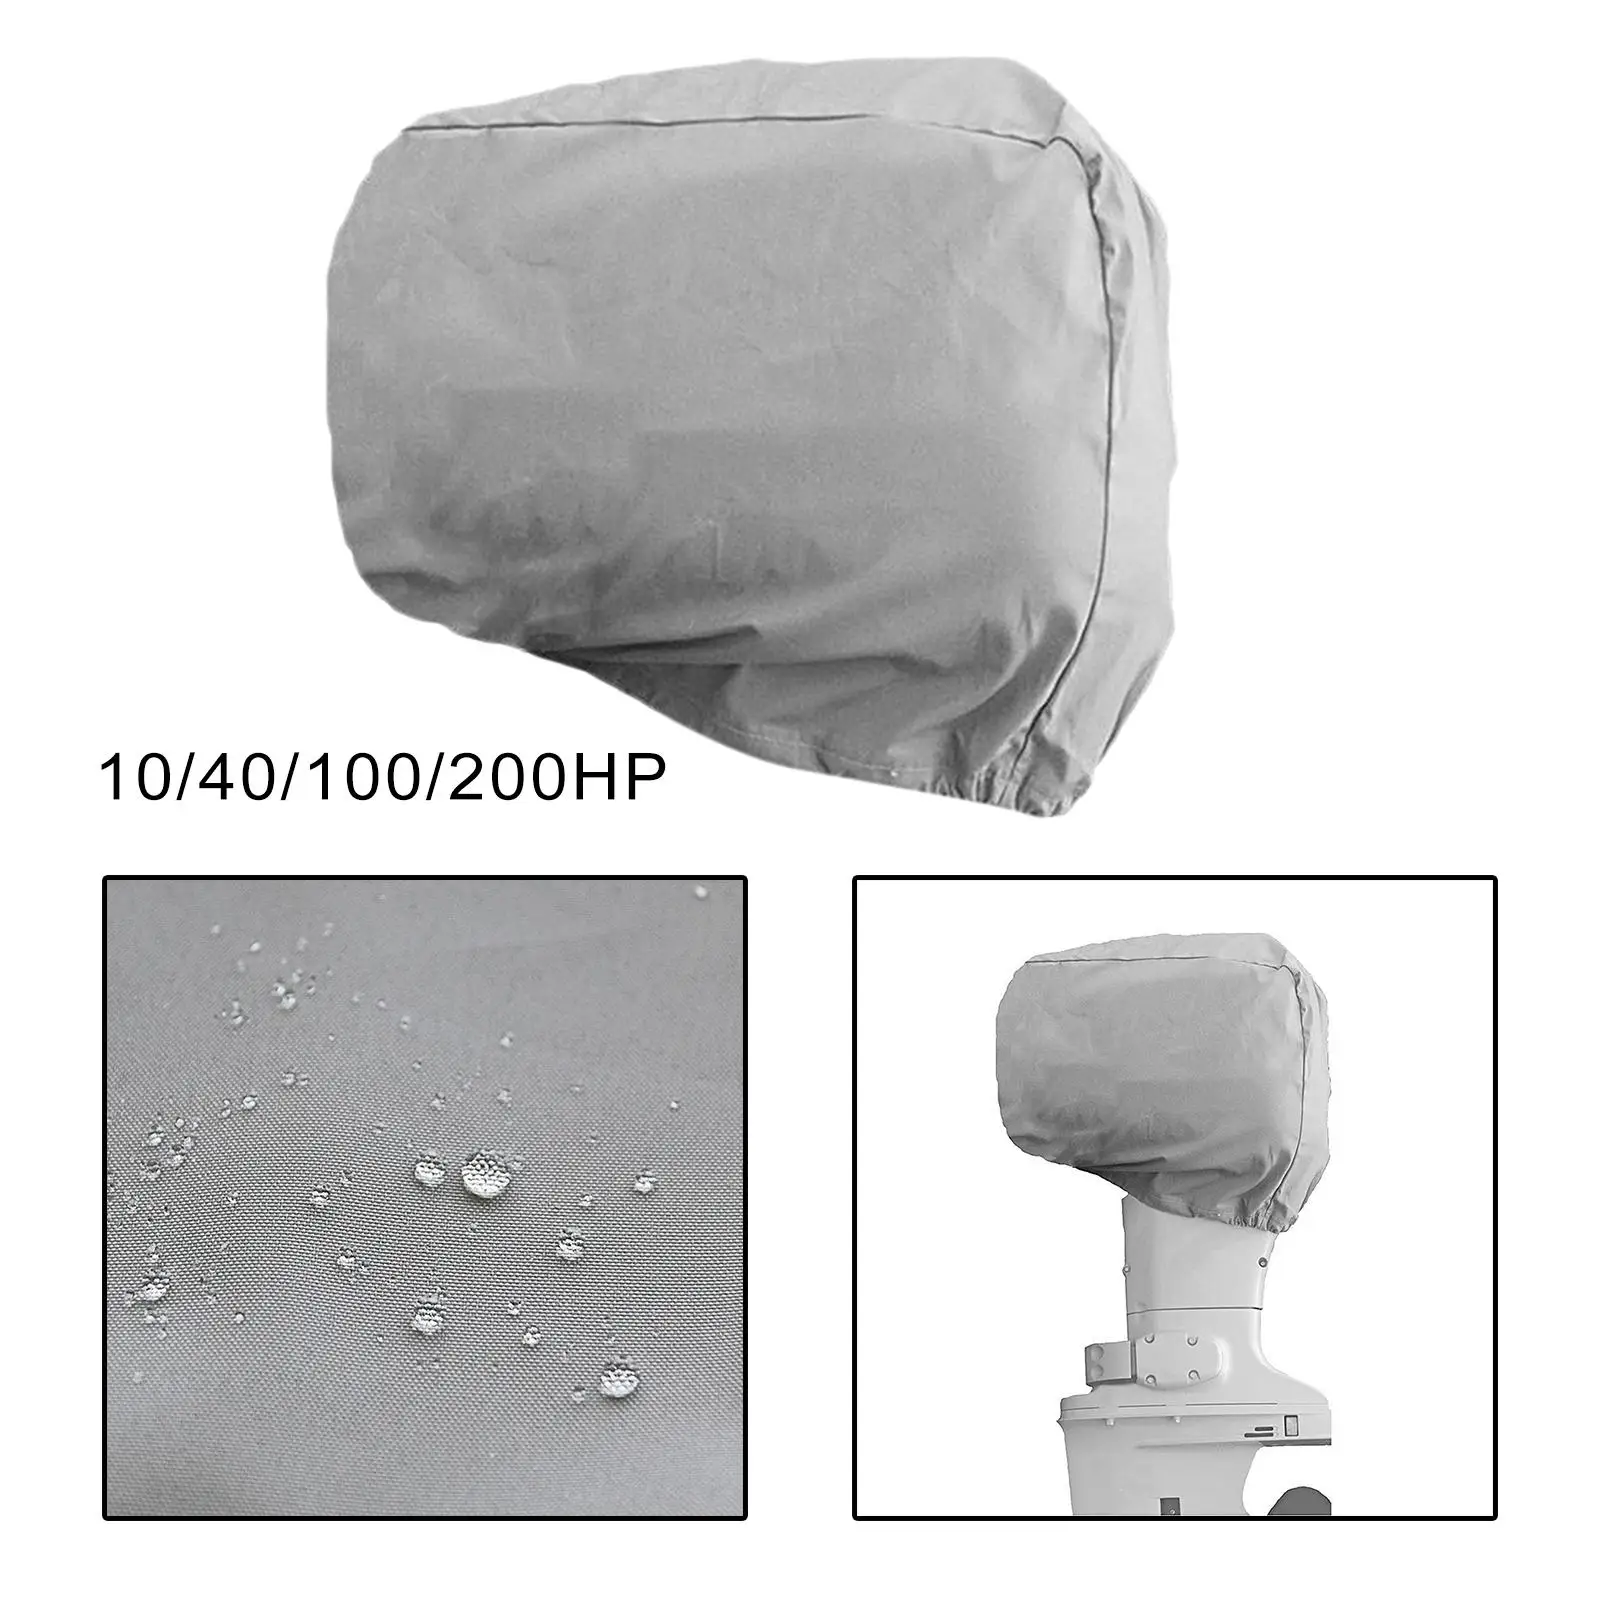 Boat Hood Covers Dust Proof Oxford Outboard Motor Cover for Boating Fishing